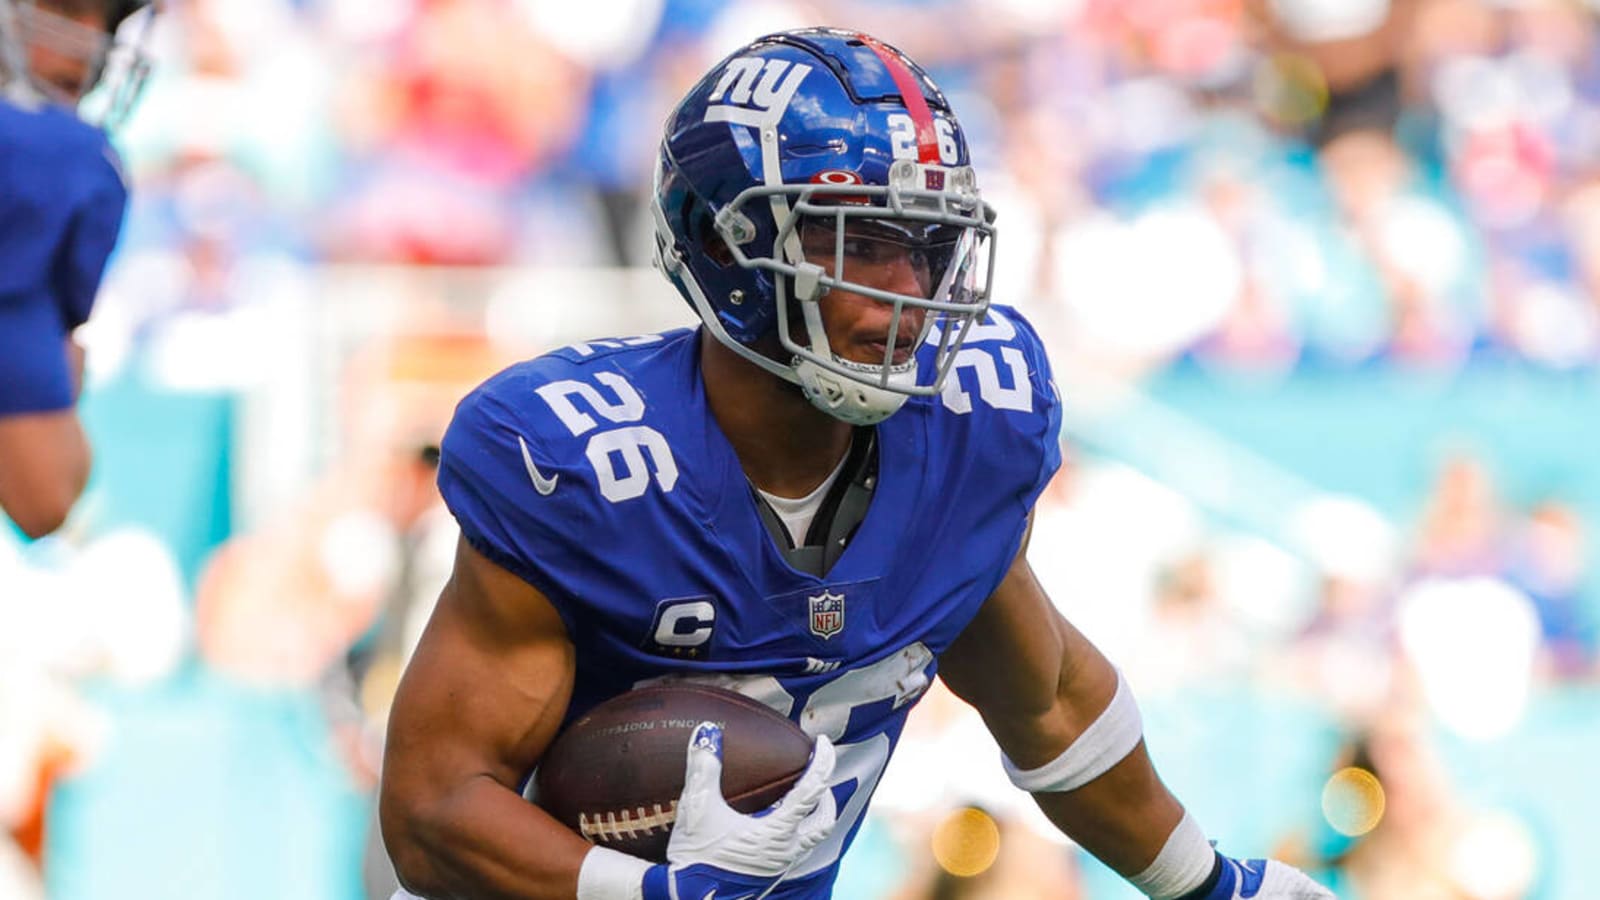 Saquon Barkley looking to prove doubters wrong